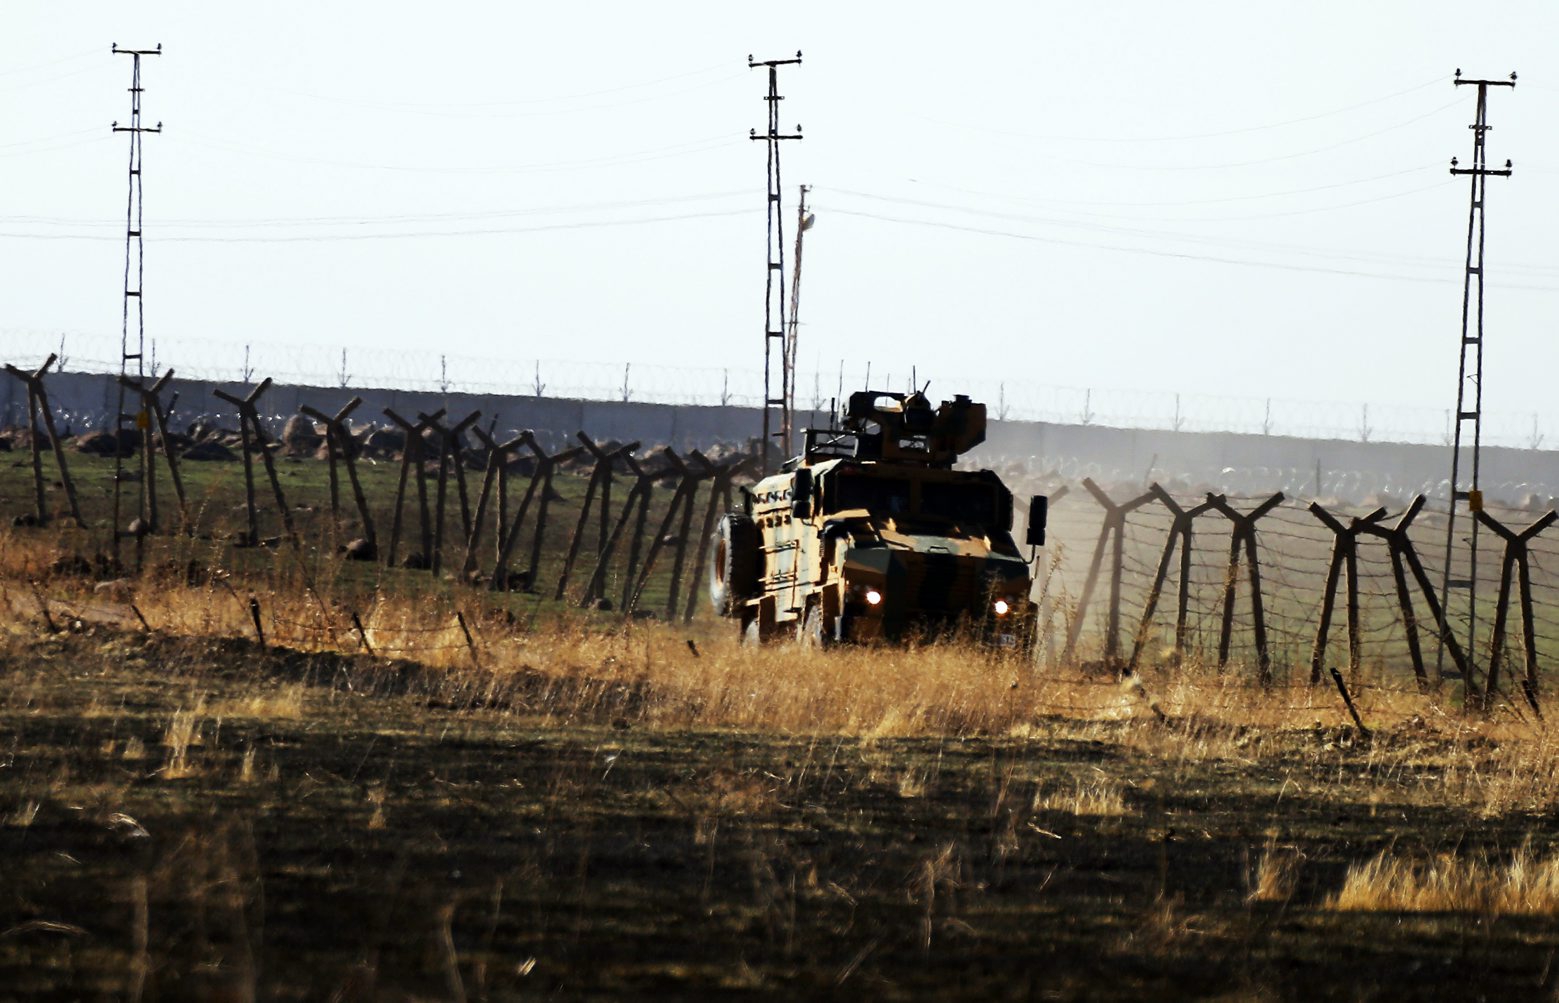 In this photo taken from the outskirts of the village of Alakamis, in Idil province, southeastern Turkey, a Turkish army vehicles is driven in Turkey after conducting a joint patrol with Russian forces in Syria, Friday, Nov. 8, 2019. The Britain-based Syrian Observatory for Human Rights says a protester has been killed when he was run over in the village of Sarmasakh, Syria near the border by a Turkish vehicle during a joint patrol with Russia.The man was among residents who pelted with shoes and stones Turkish and Russian troops who were conducting their third joint patrol in northeastern Syria, under a cease-fire deal brokered by Moscow that forced Kurdish fighters to withdraw from areas bordering Turkey. (AP Photo/Mehmet Guzel) Turkey Russia Syria